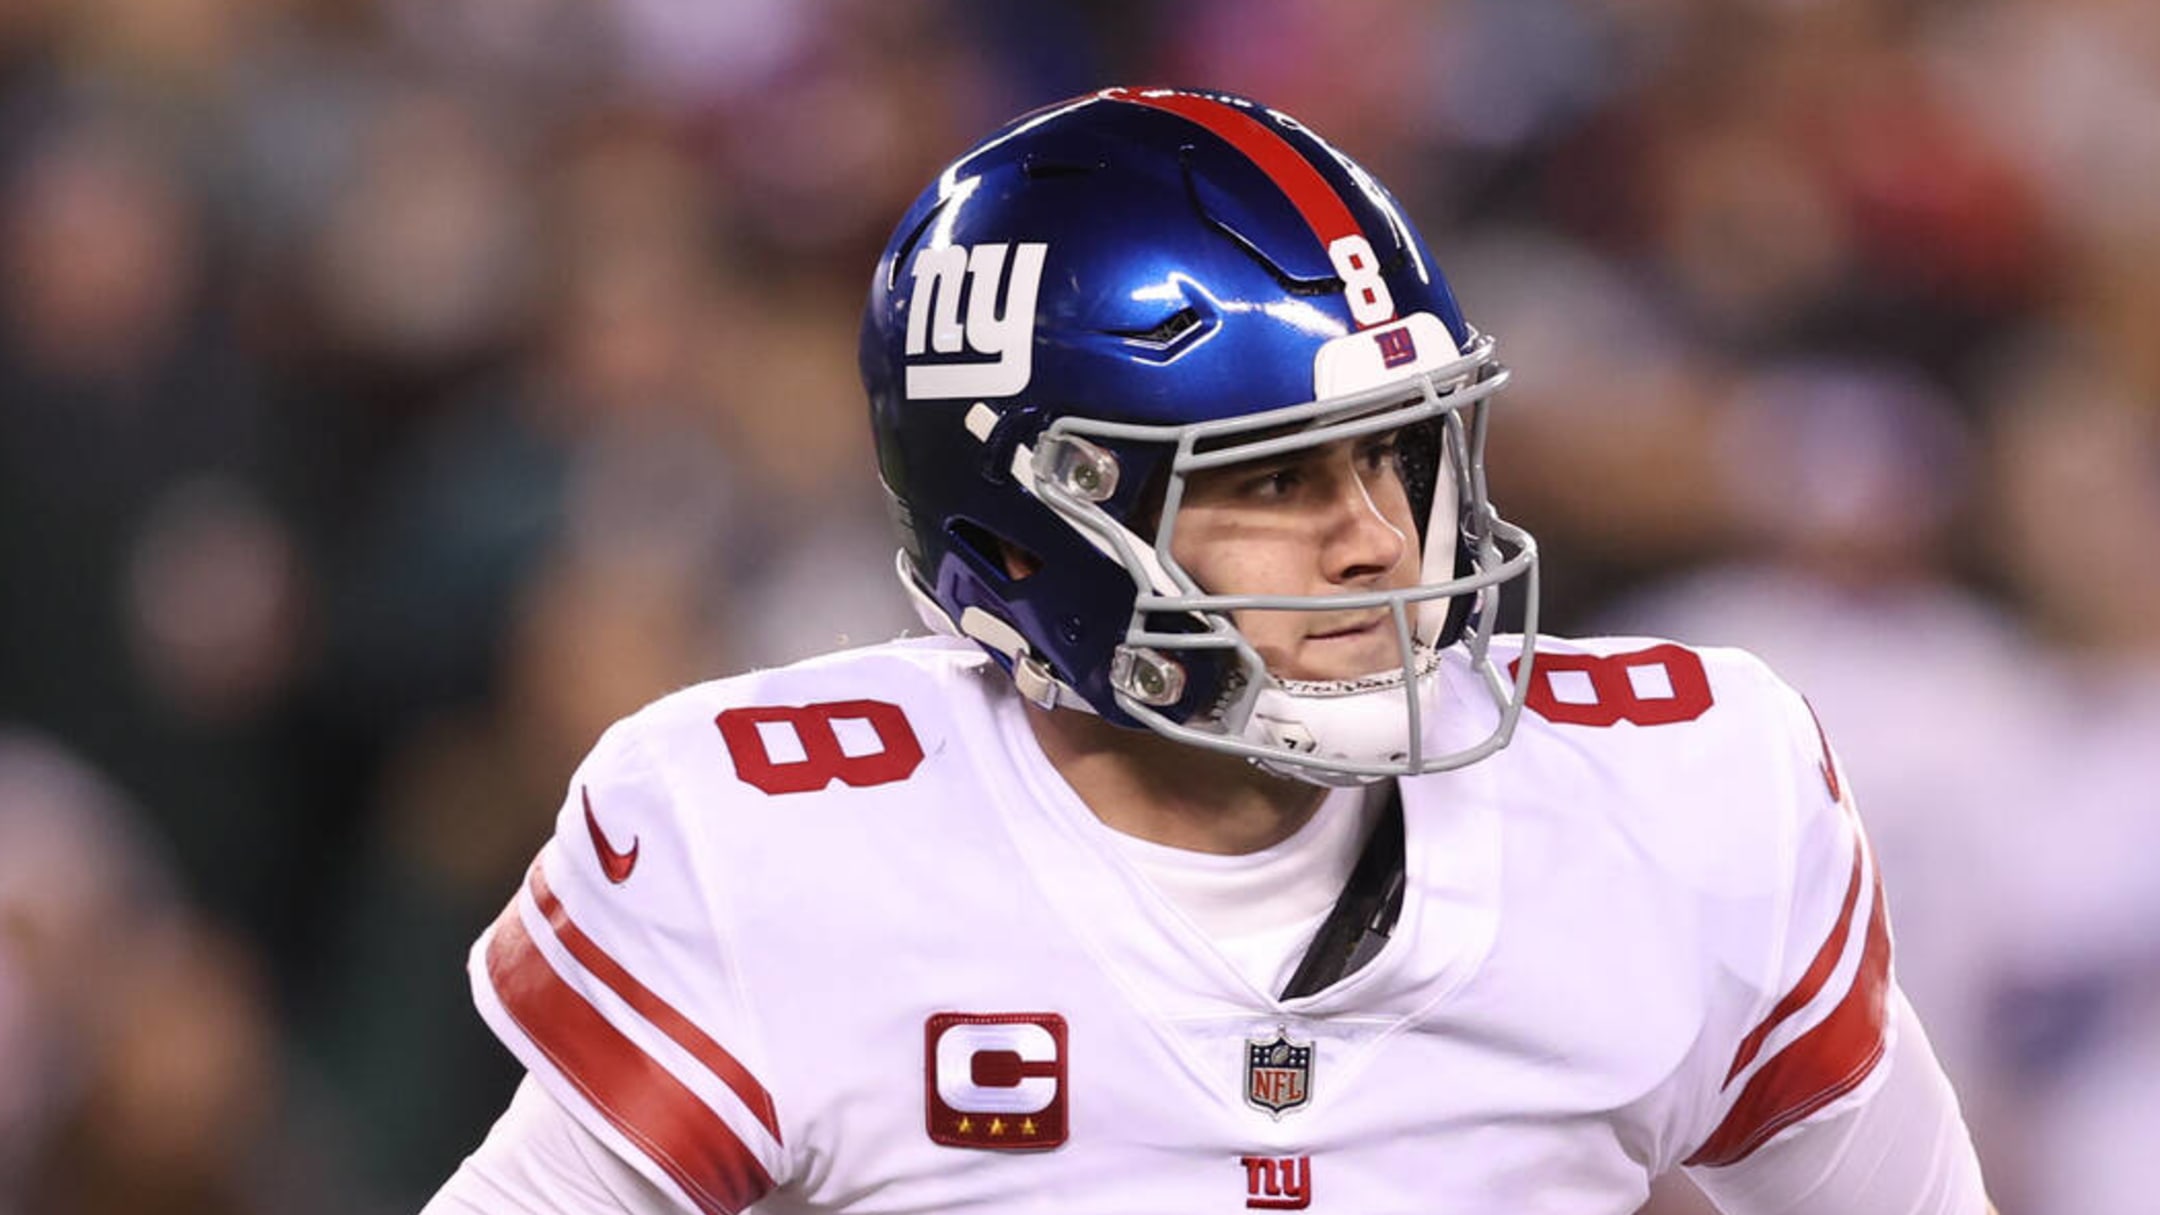 Ex-Giants RB Tiki Barber has a ridiculous take on NY Jets QB Zach Wilson